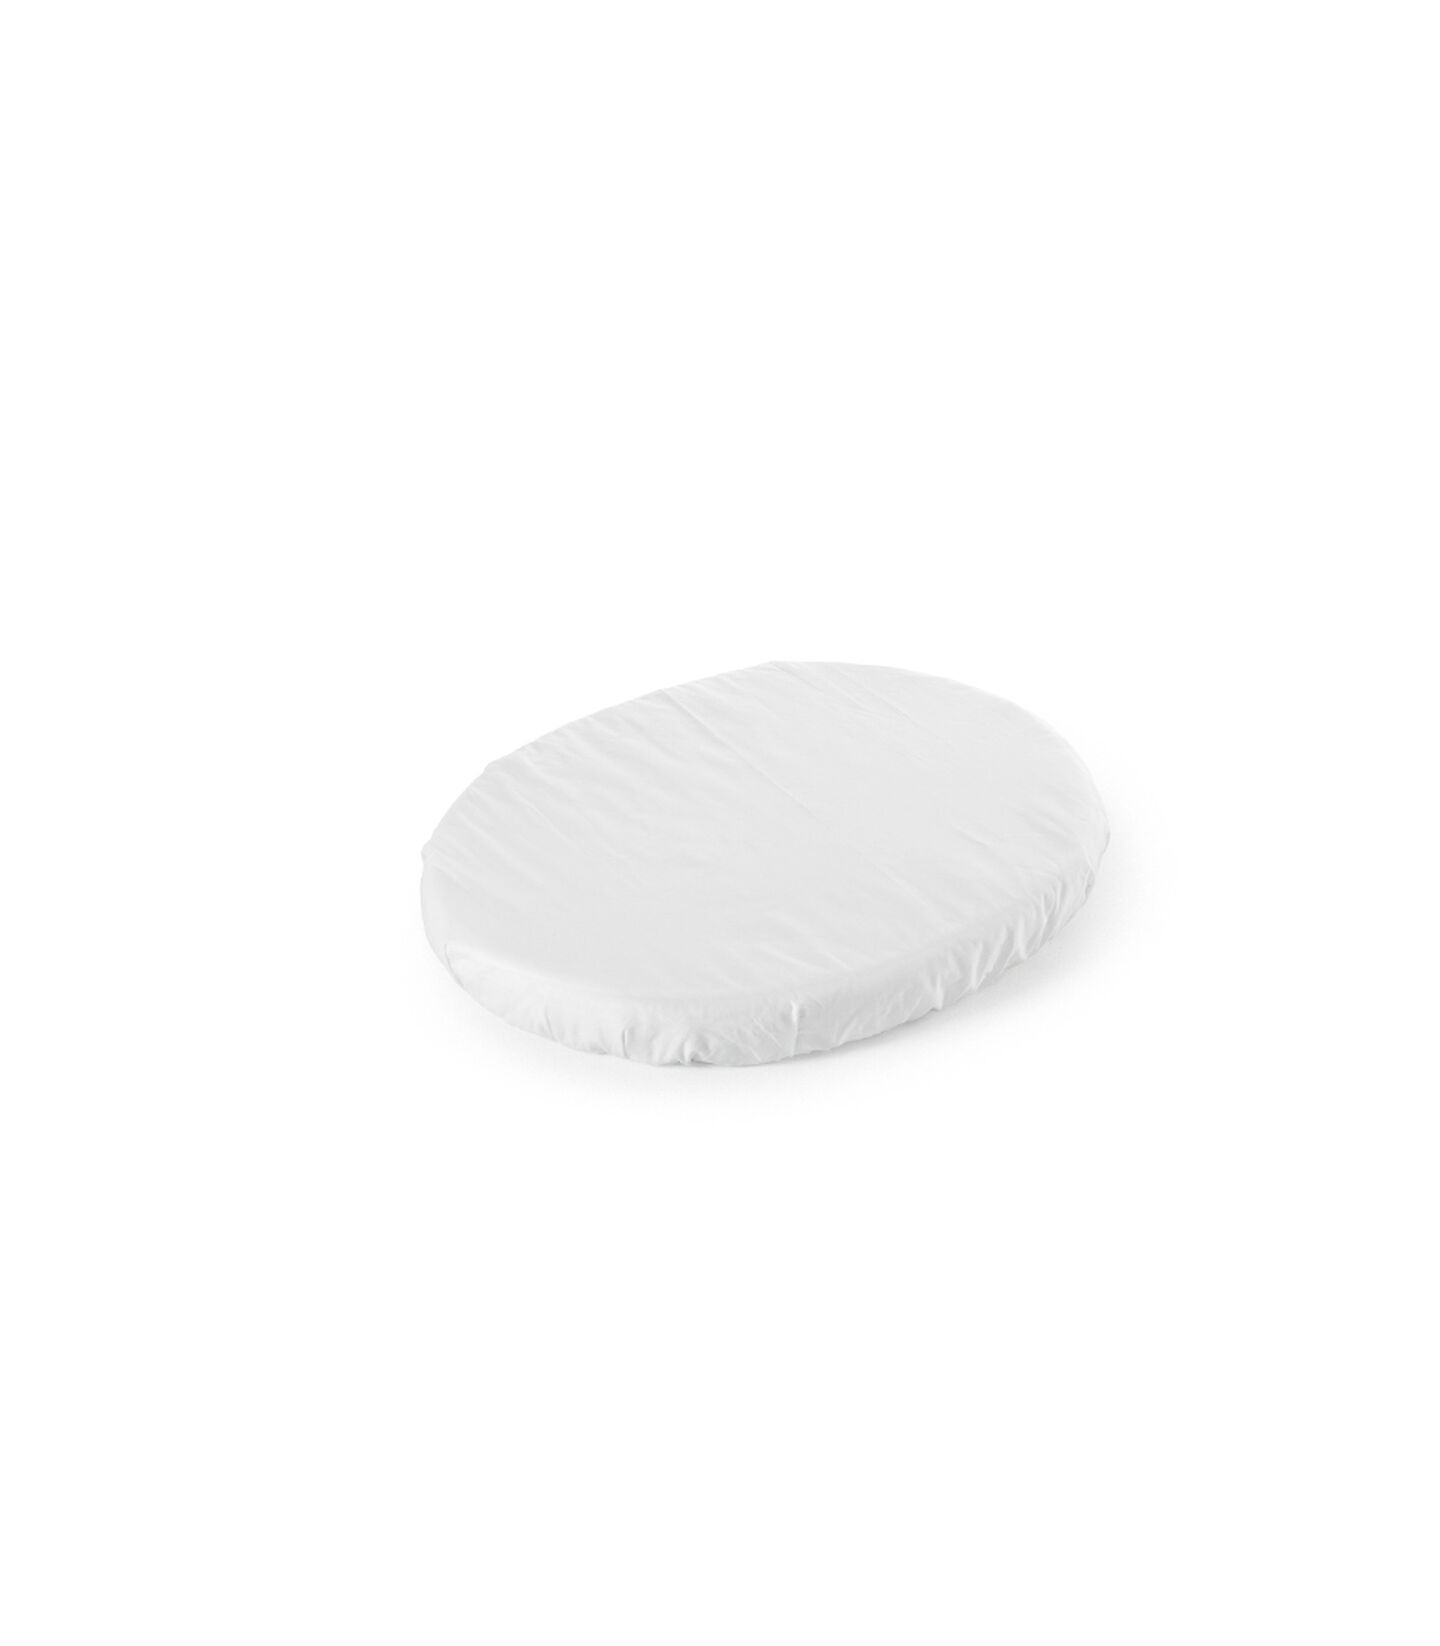 Stokke® Sleepi™ Mini Fitted Sheet Белый, Белый, mainview view 1